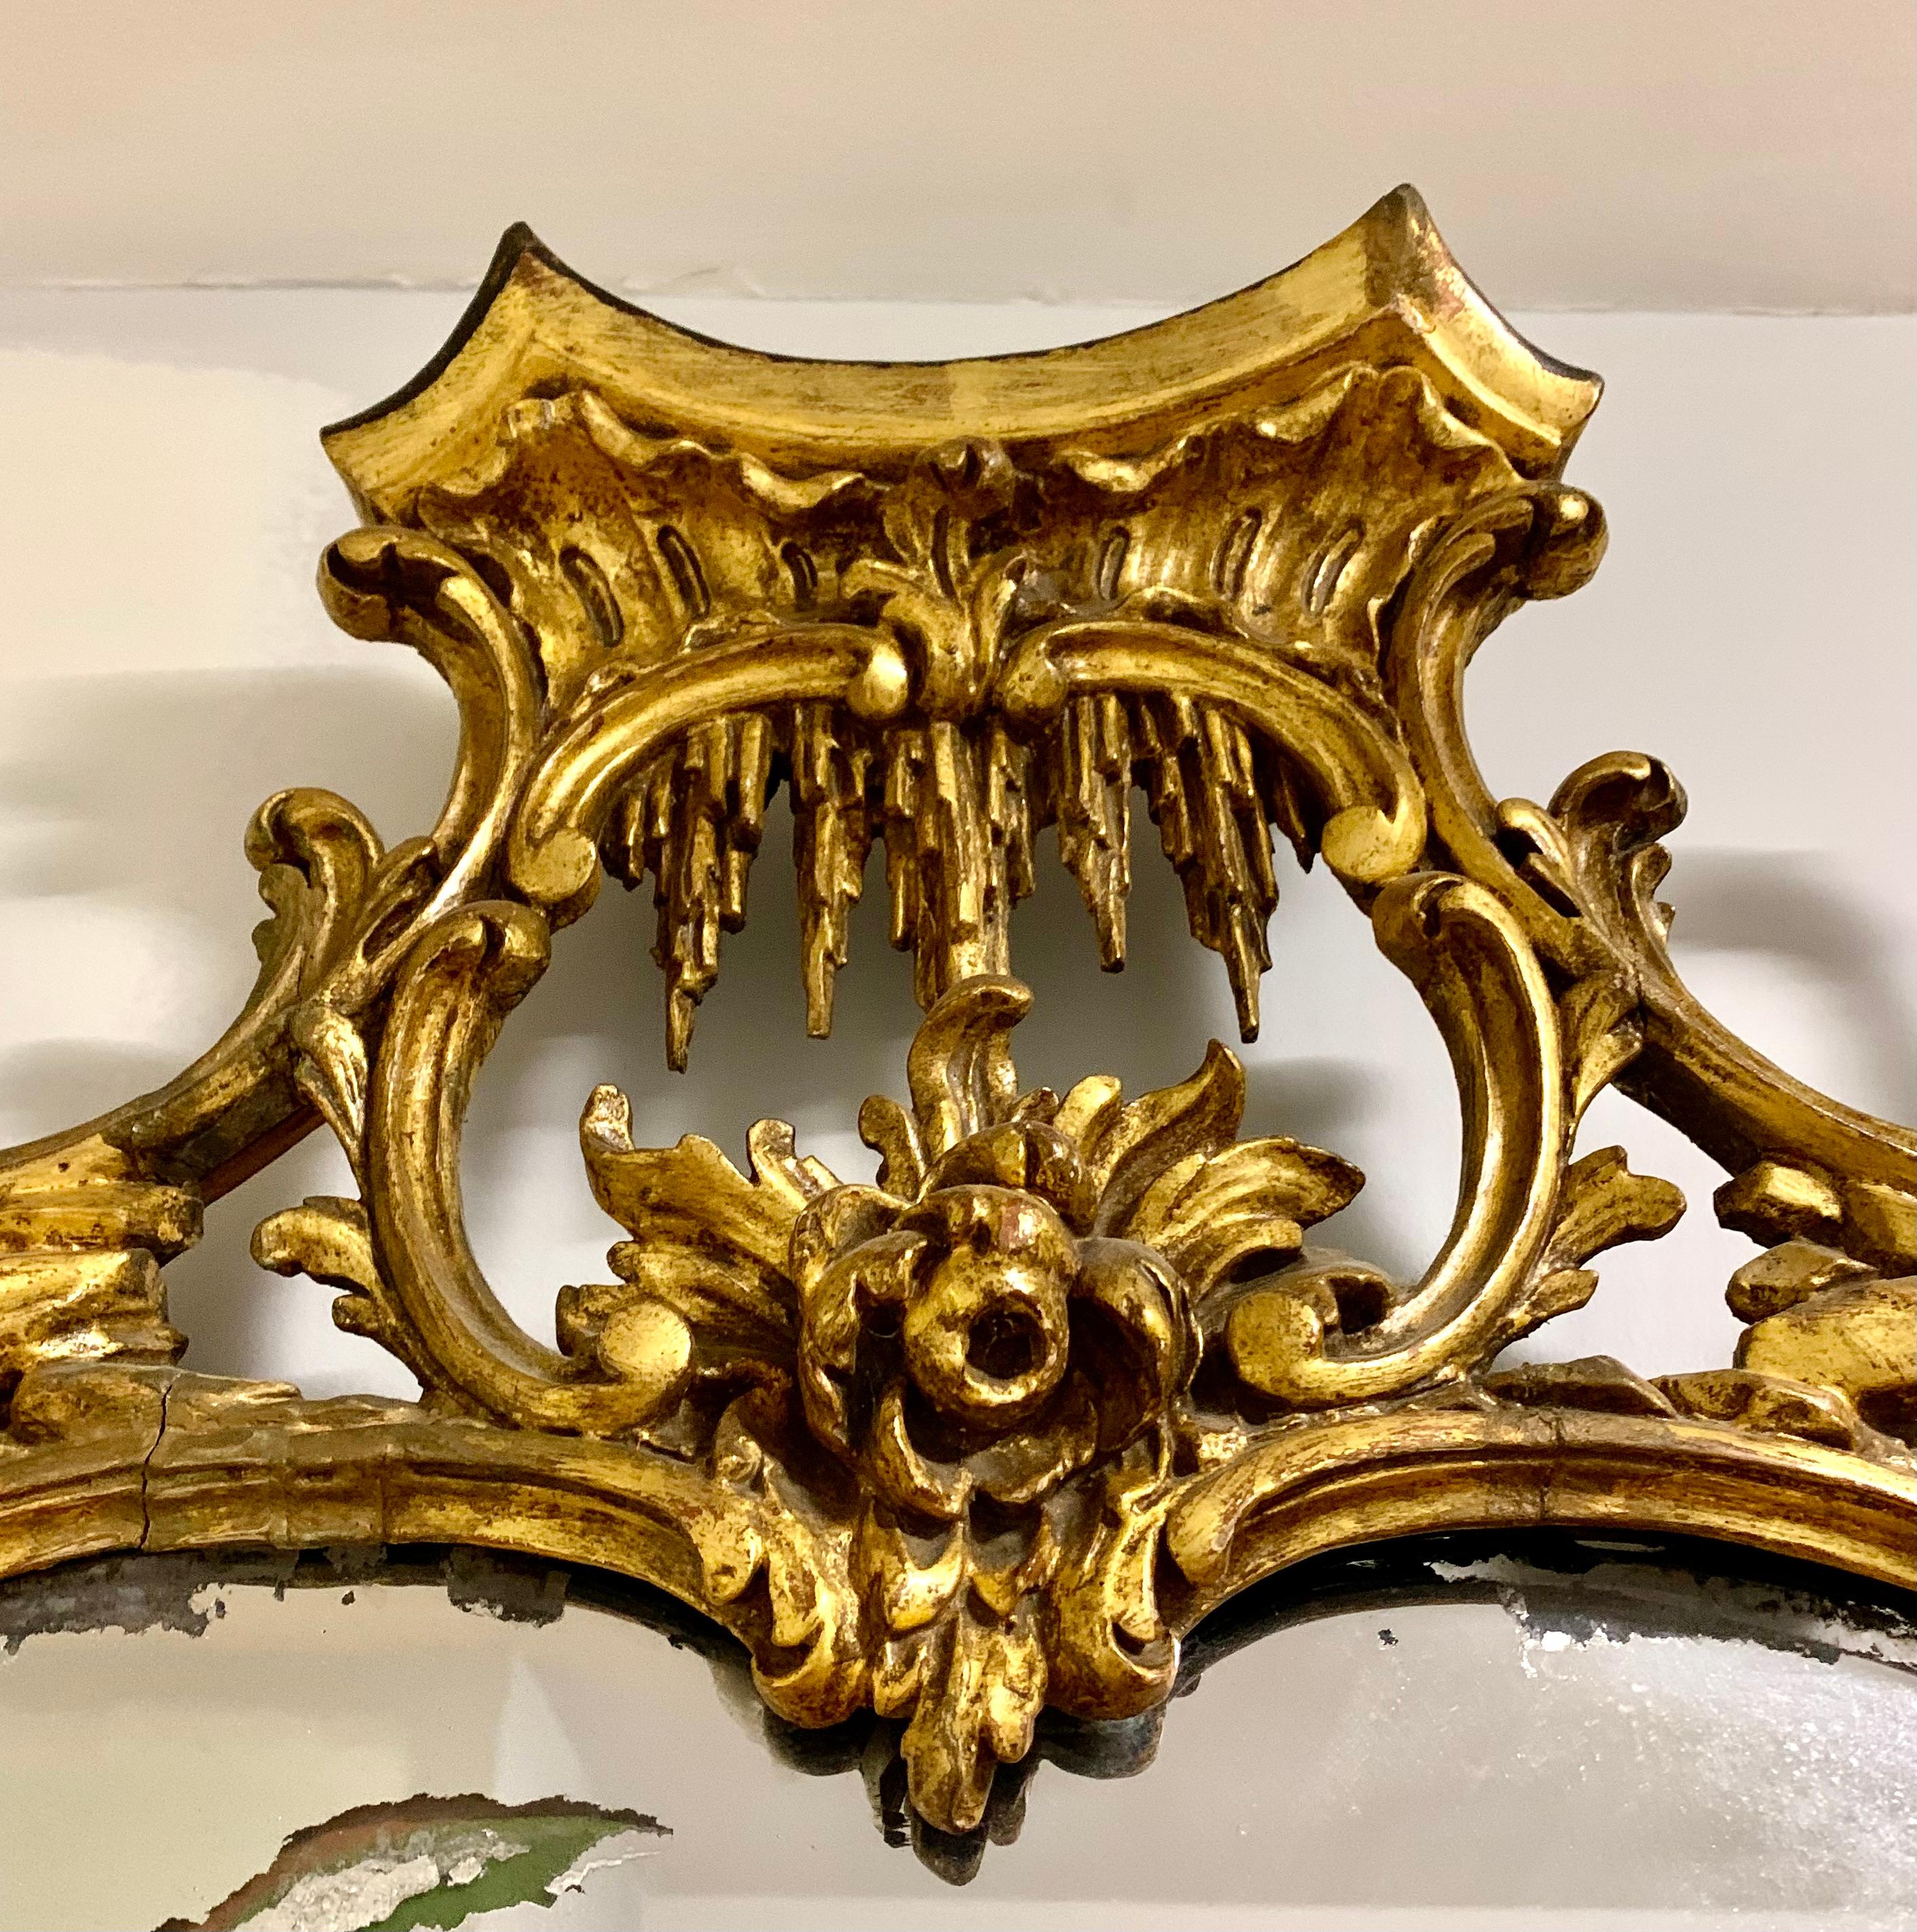 A superb 18th century Chinese Chippendale carved giltwood mirror of exceptional detail.
The pierced foliate frame with climbing roses on architectural column elements of pagoda form, with a central Pagoda crest with stylized icicles above a large